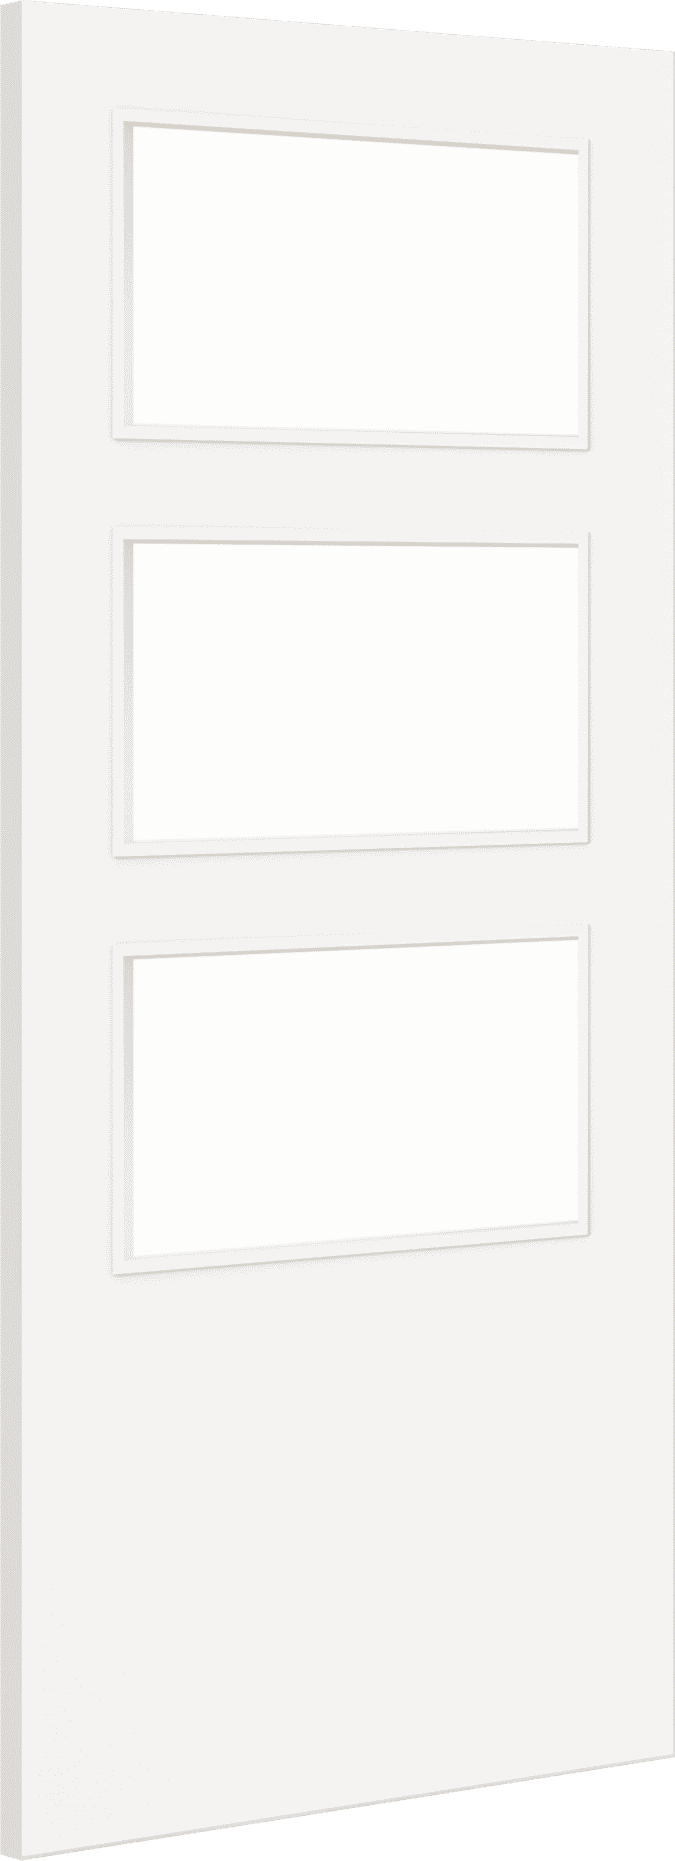 1981mm x 610mm x 44mm (24") Architectural Paint Grade White 03 Clear Glazed Fire Door Blank